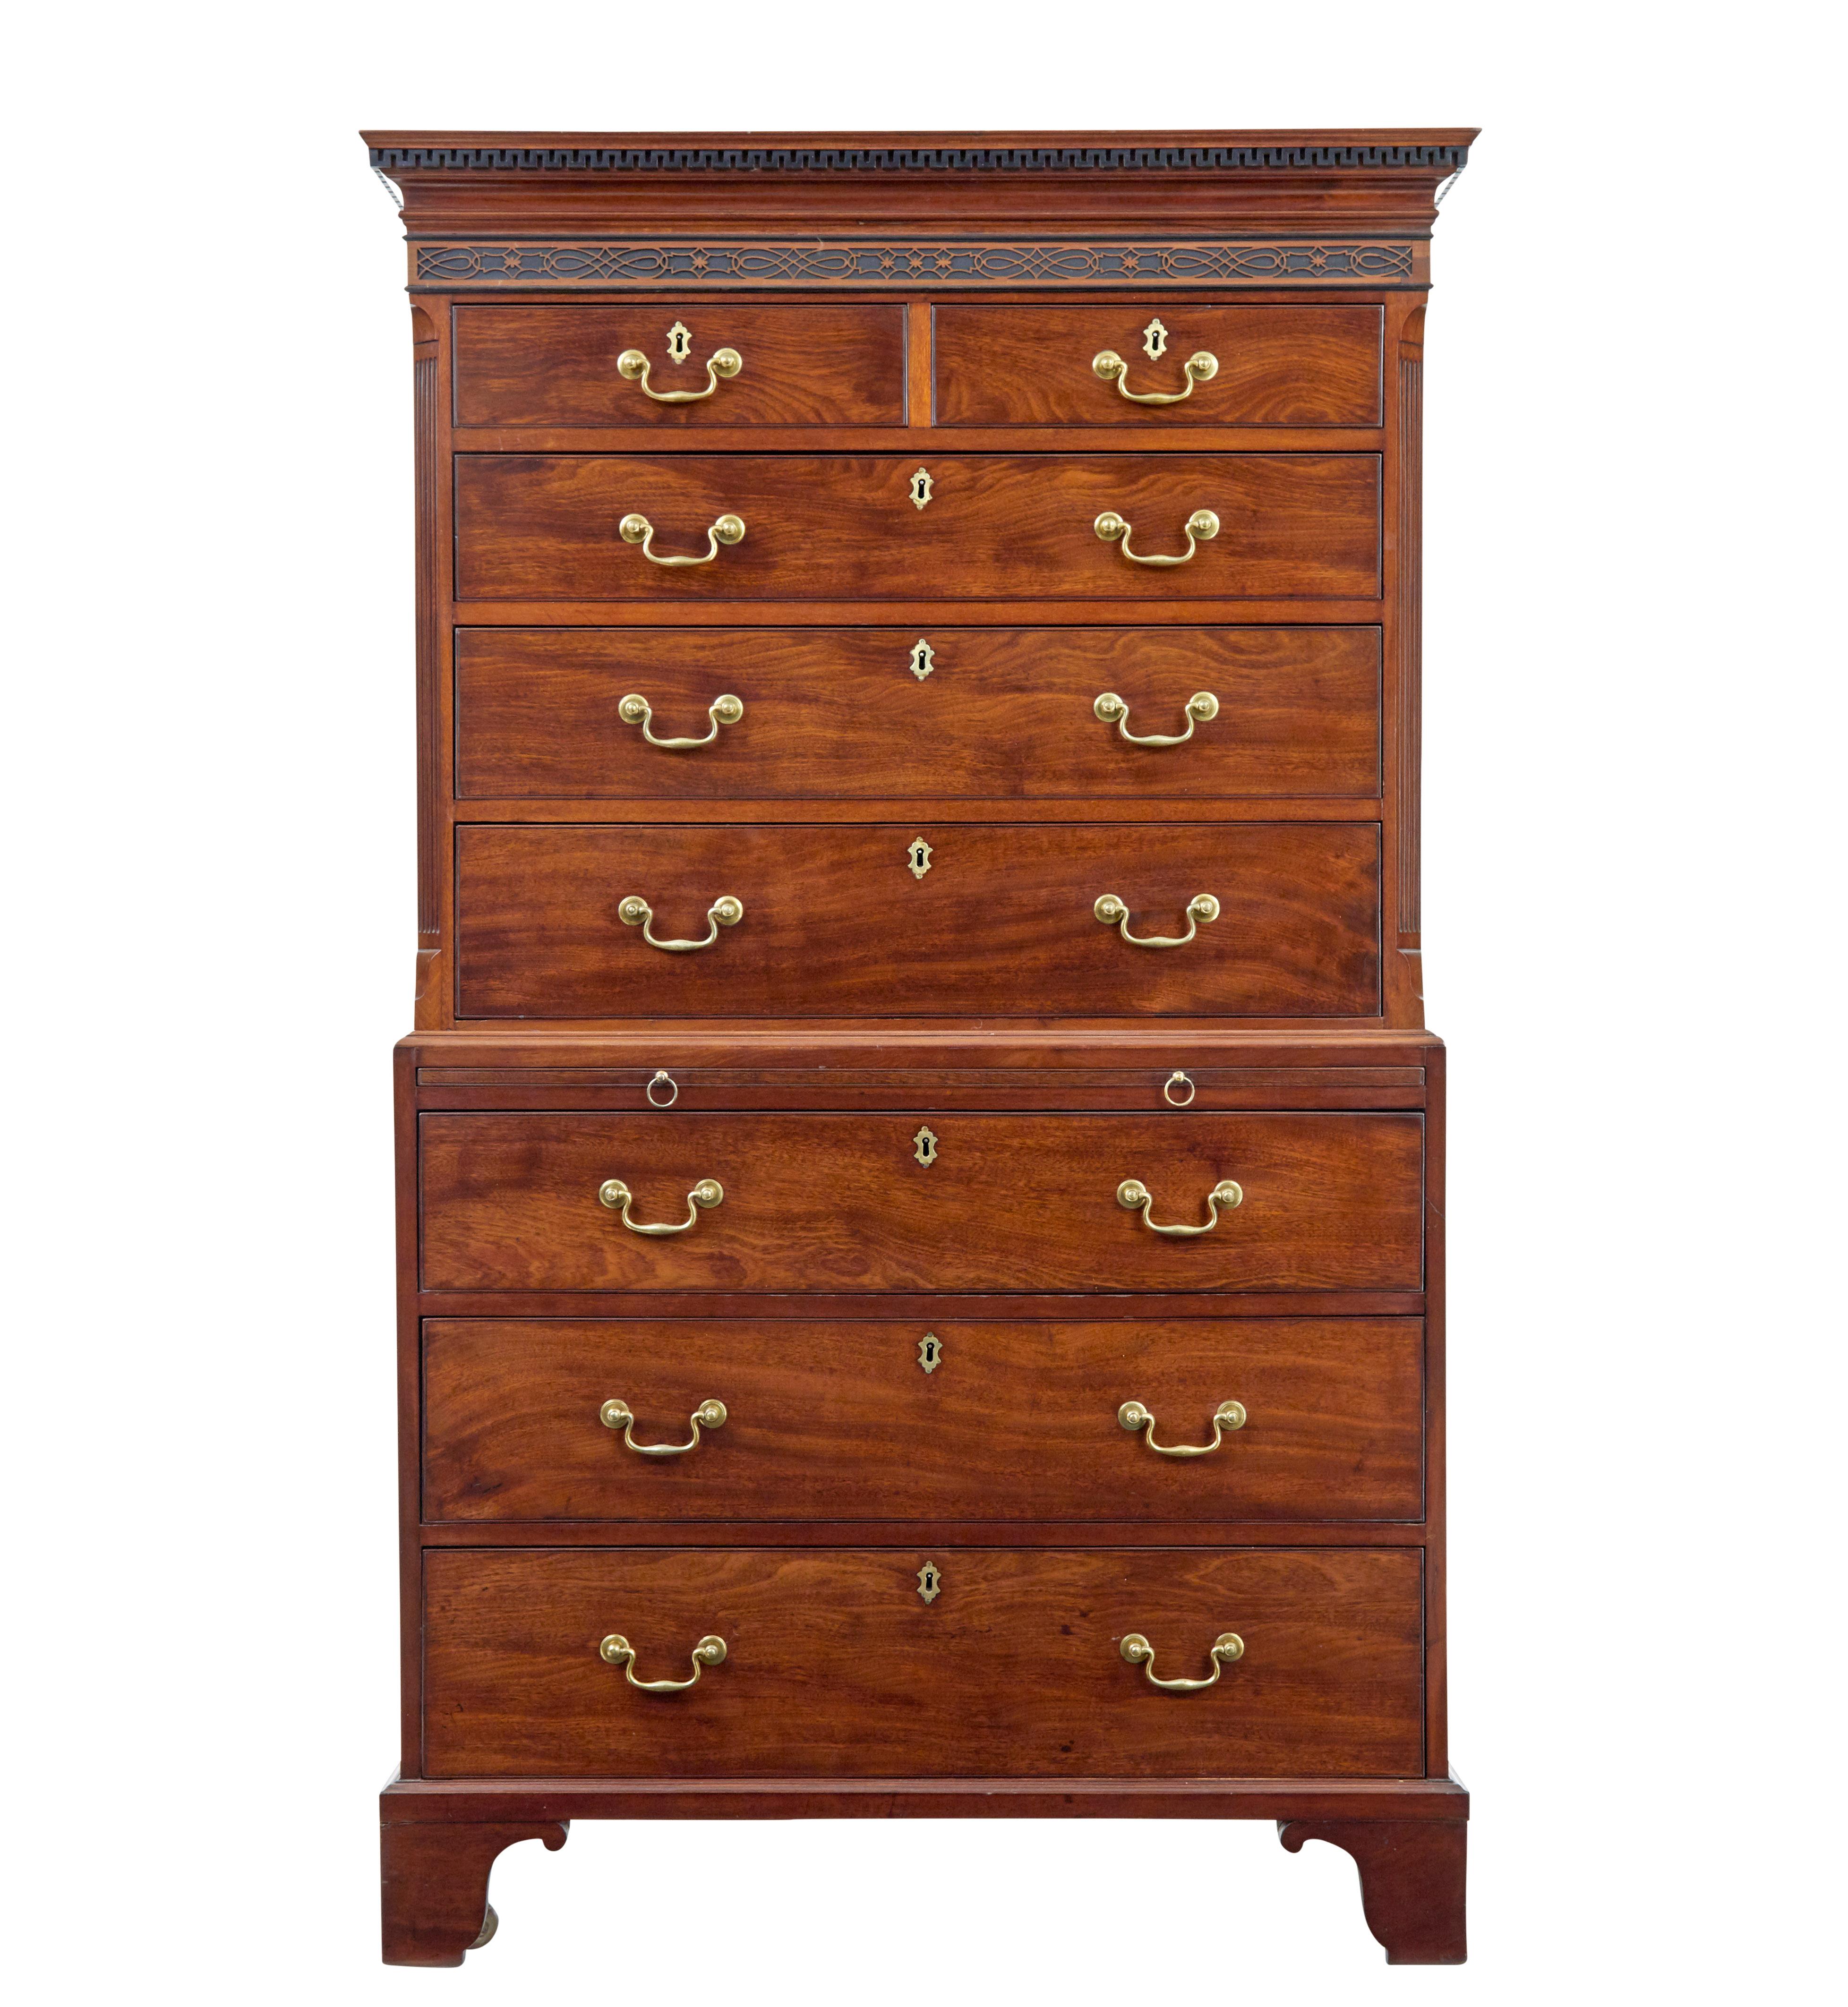 Early 19th century channel island mahogany chest on chest  circa 1830.

Fine quality chest on chest from the channel islands, comprising of 2 sections.  Cornice decorated with greek key dentil freize, with a blind fretwork border below.  2 over 3